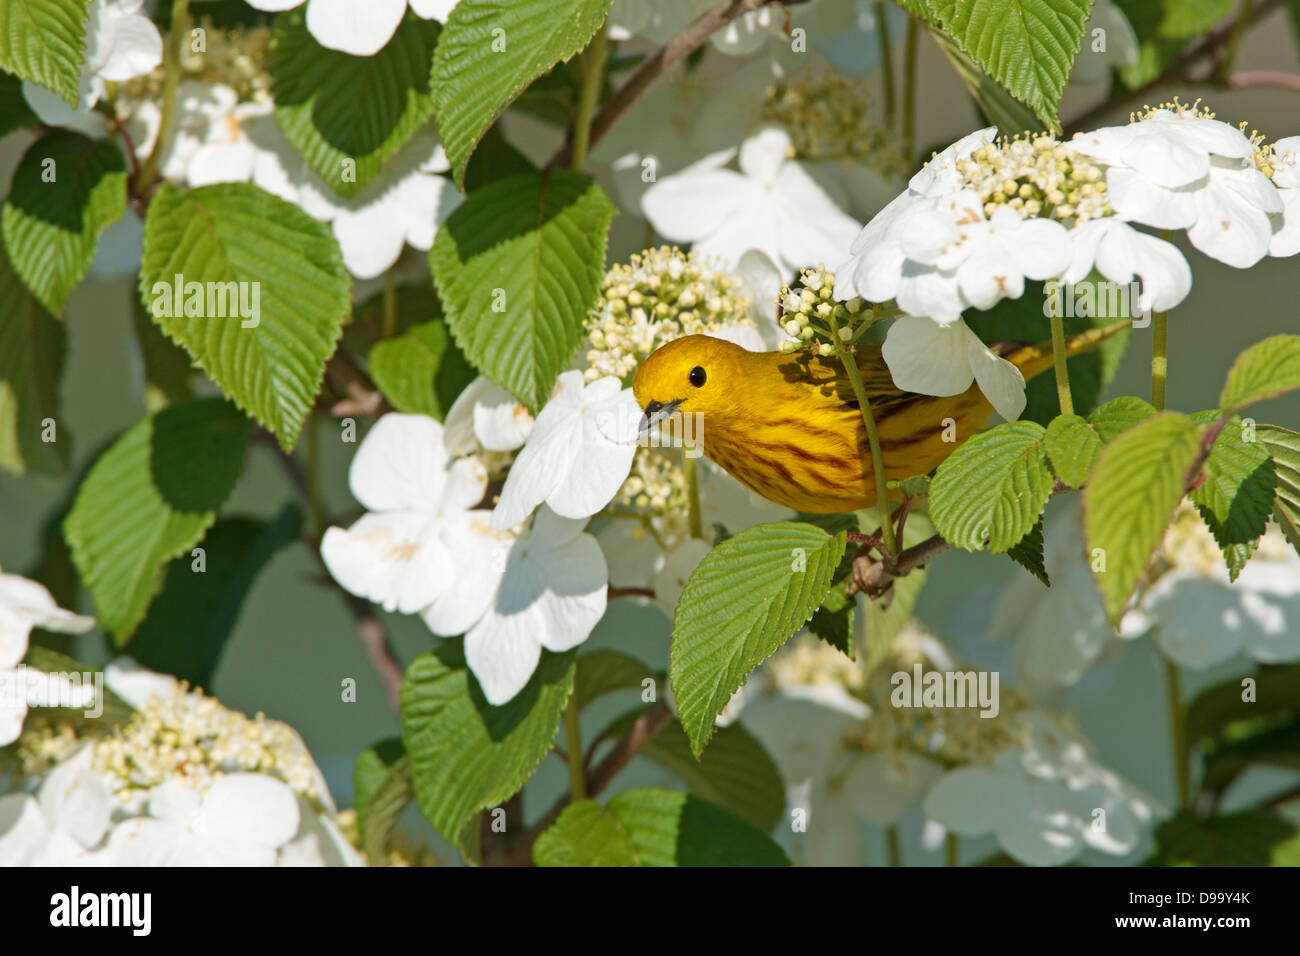 Yellow Warbler perching in Vibernum Blossoms bird songbird Ornithology Science Nature Wildlife Environment Stock Photo